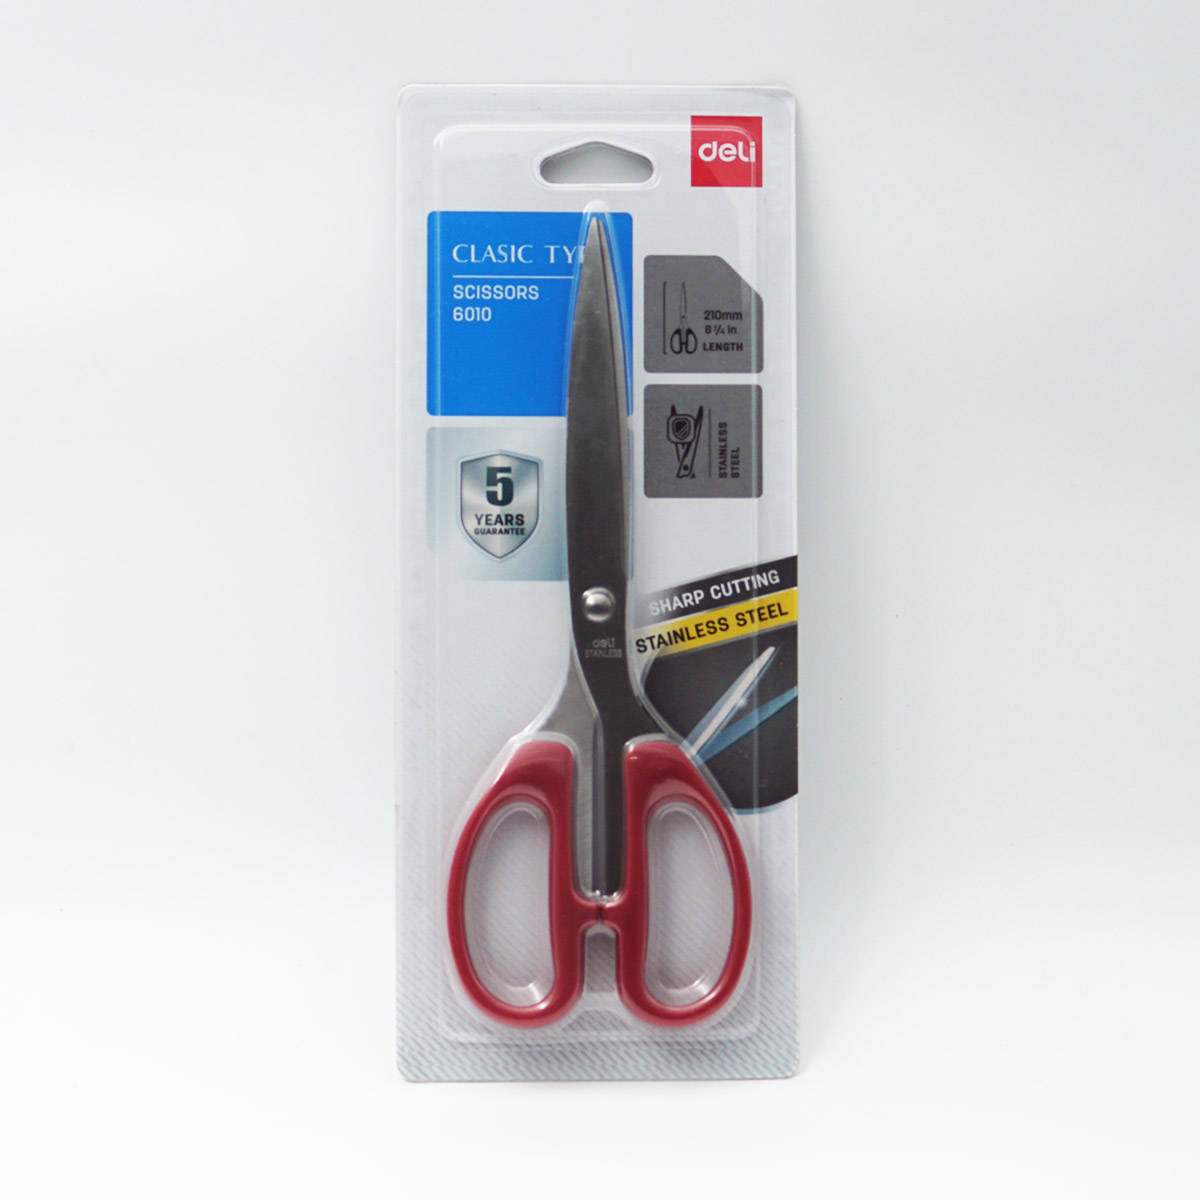 Deli  6010 210 Clasic Type Stainless Steel Red Color Scissors SKU 96656